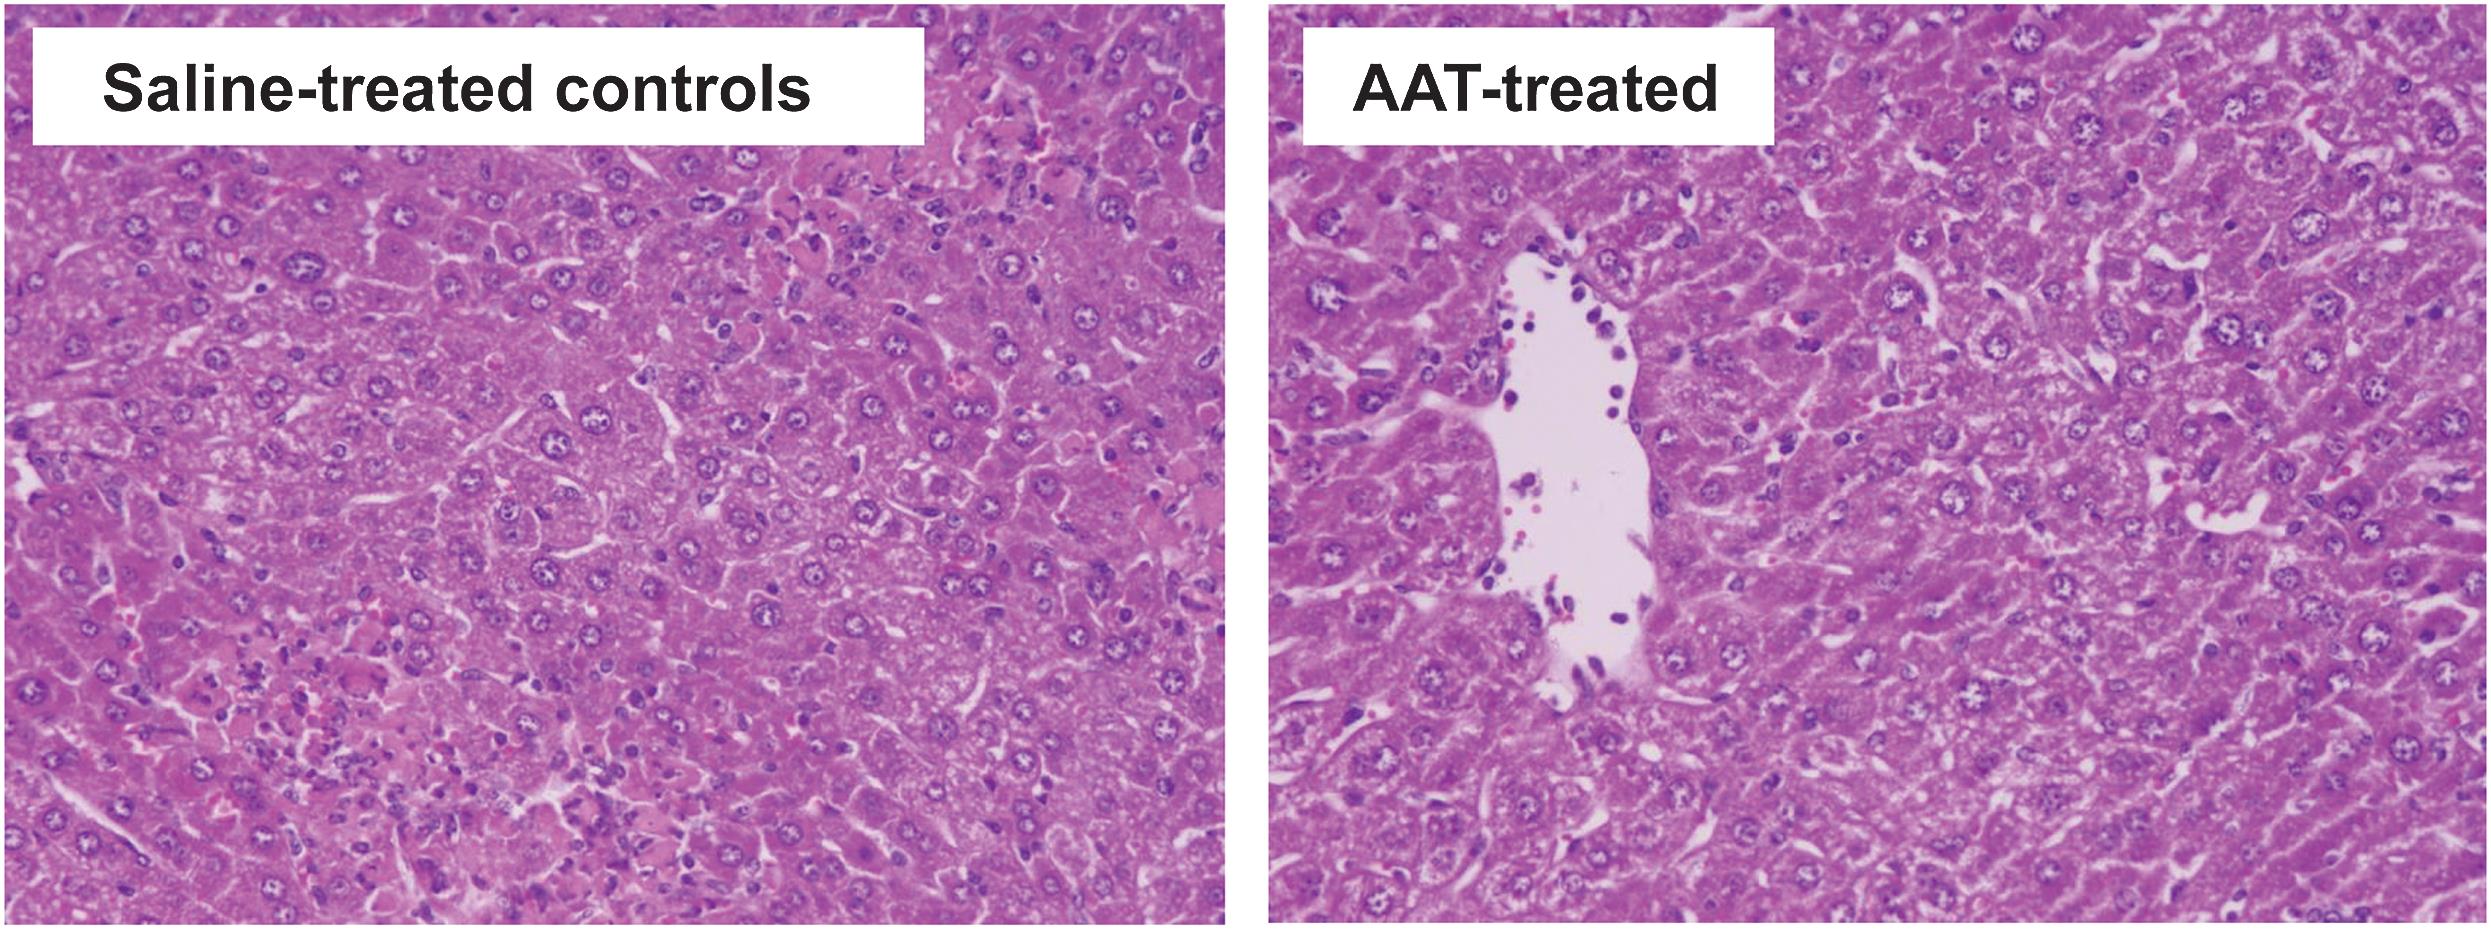 Effect of AAT on histology in the ConA-induced hepatitis model.